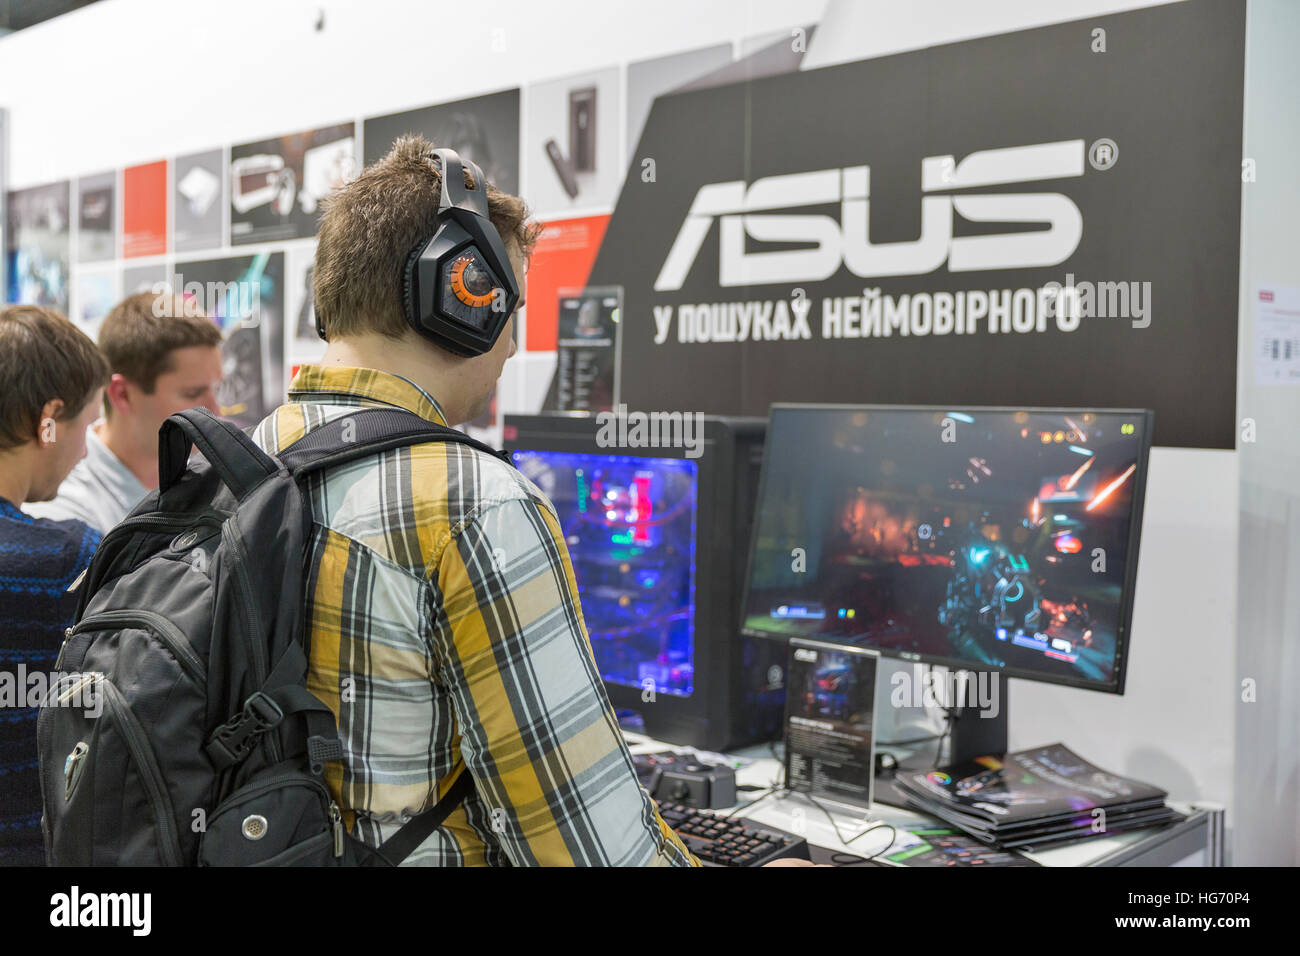 Unrecognized people visit Asus, a Taiwan based international computer company booth during CEE 2016. Stock Photo